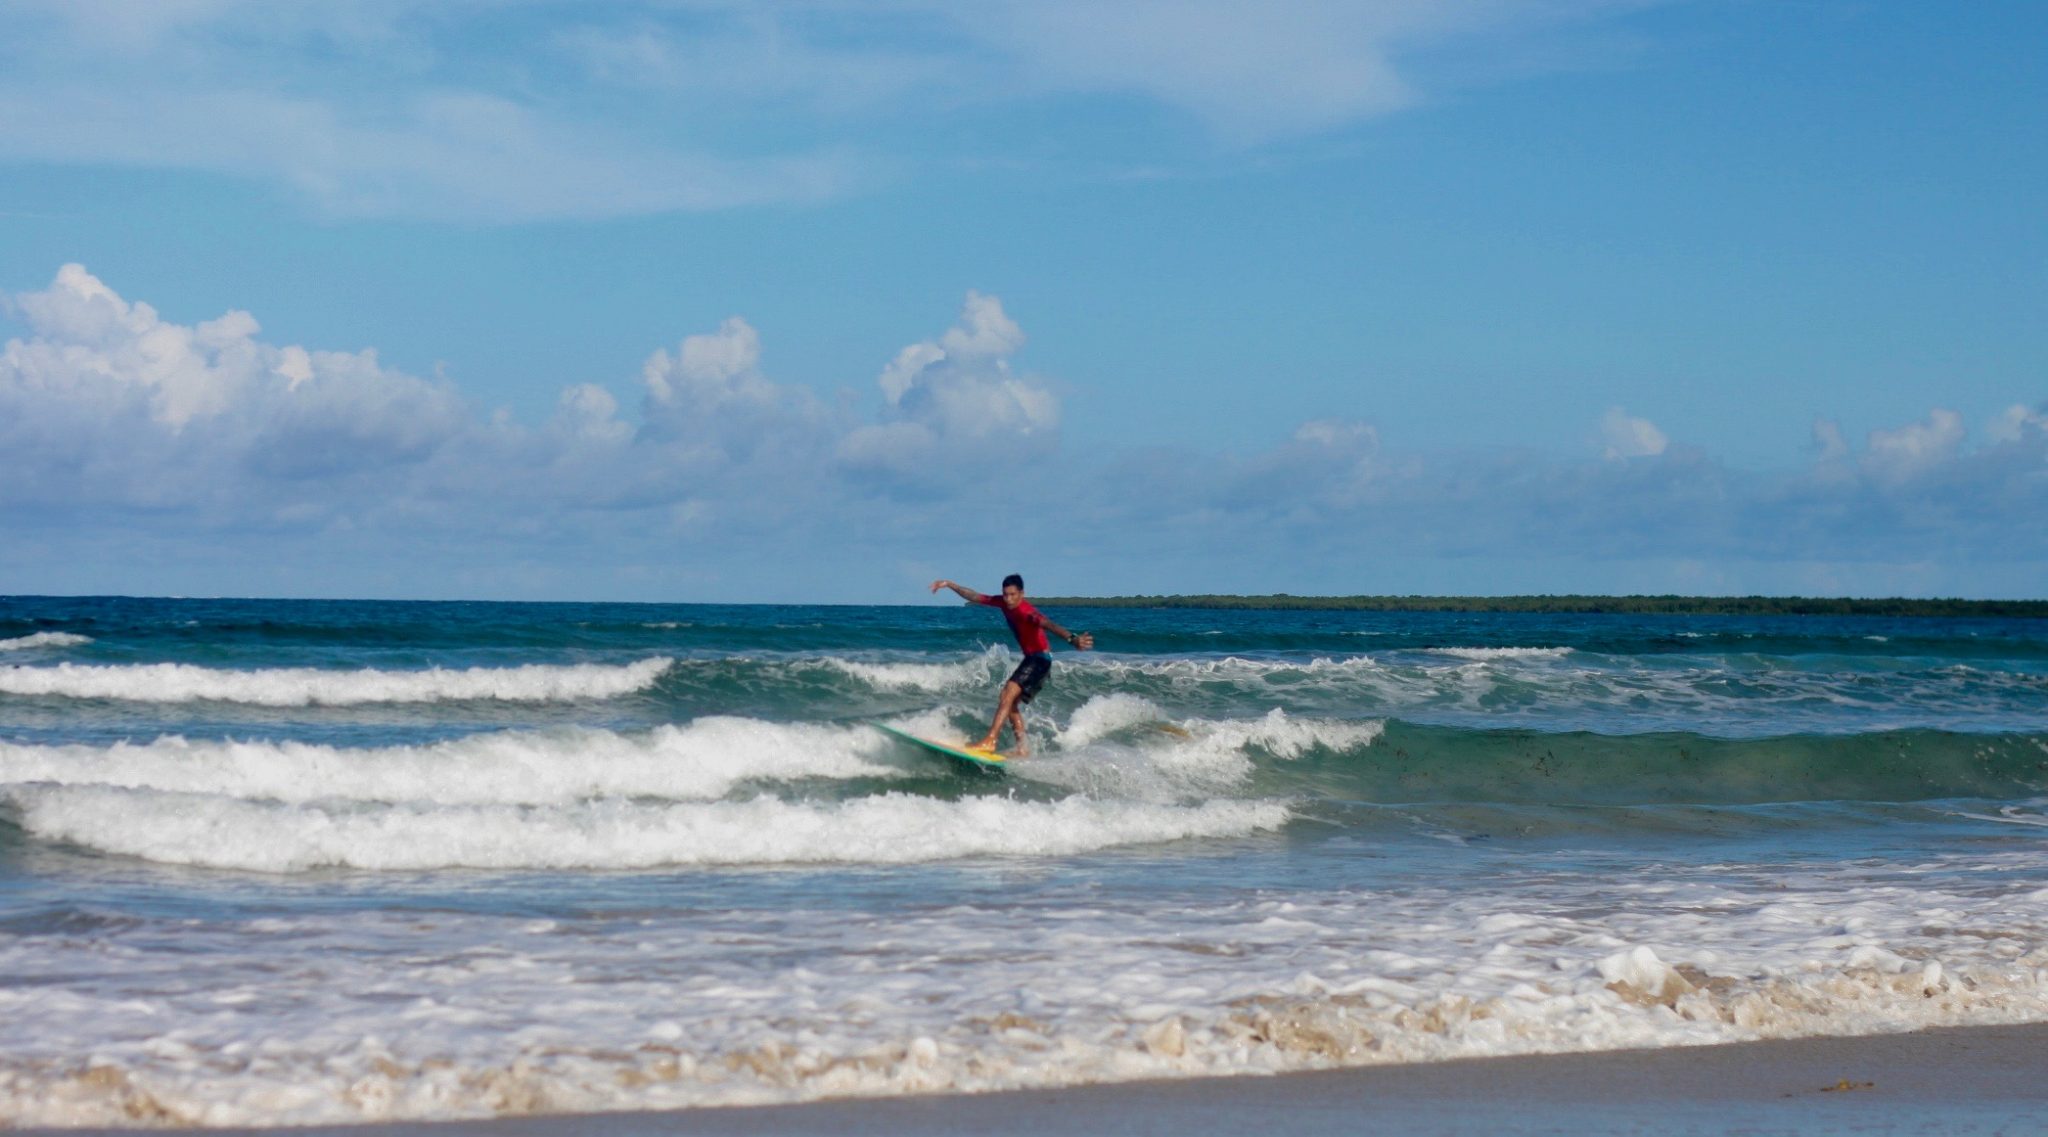 As much as surfing is integral in the lives of children, education remains a priority